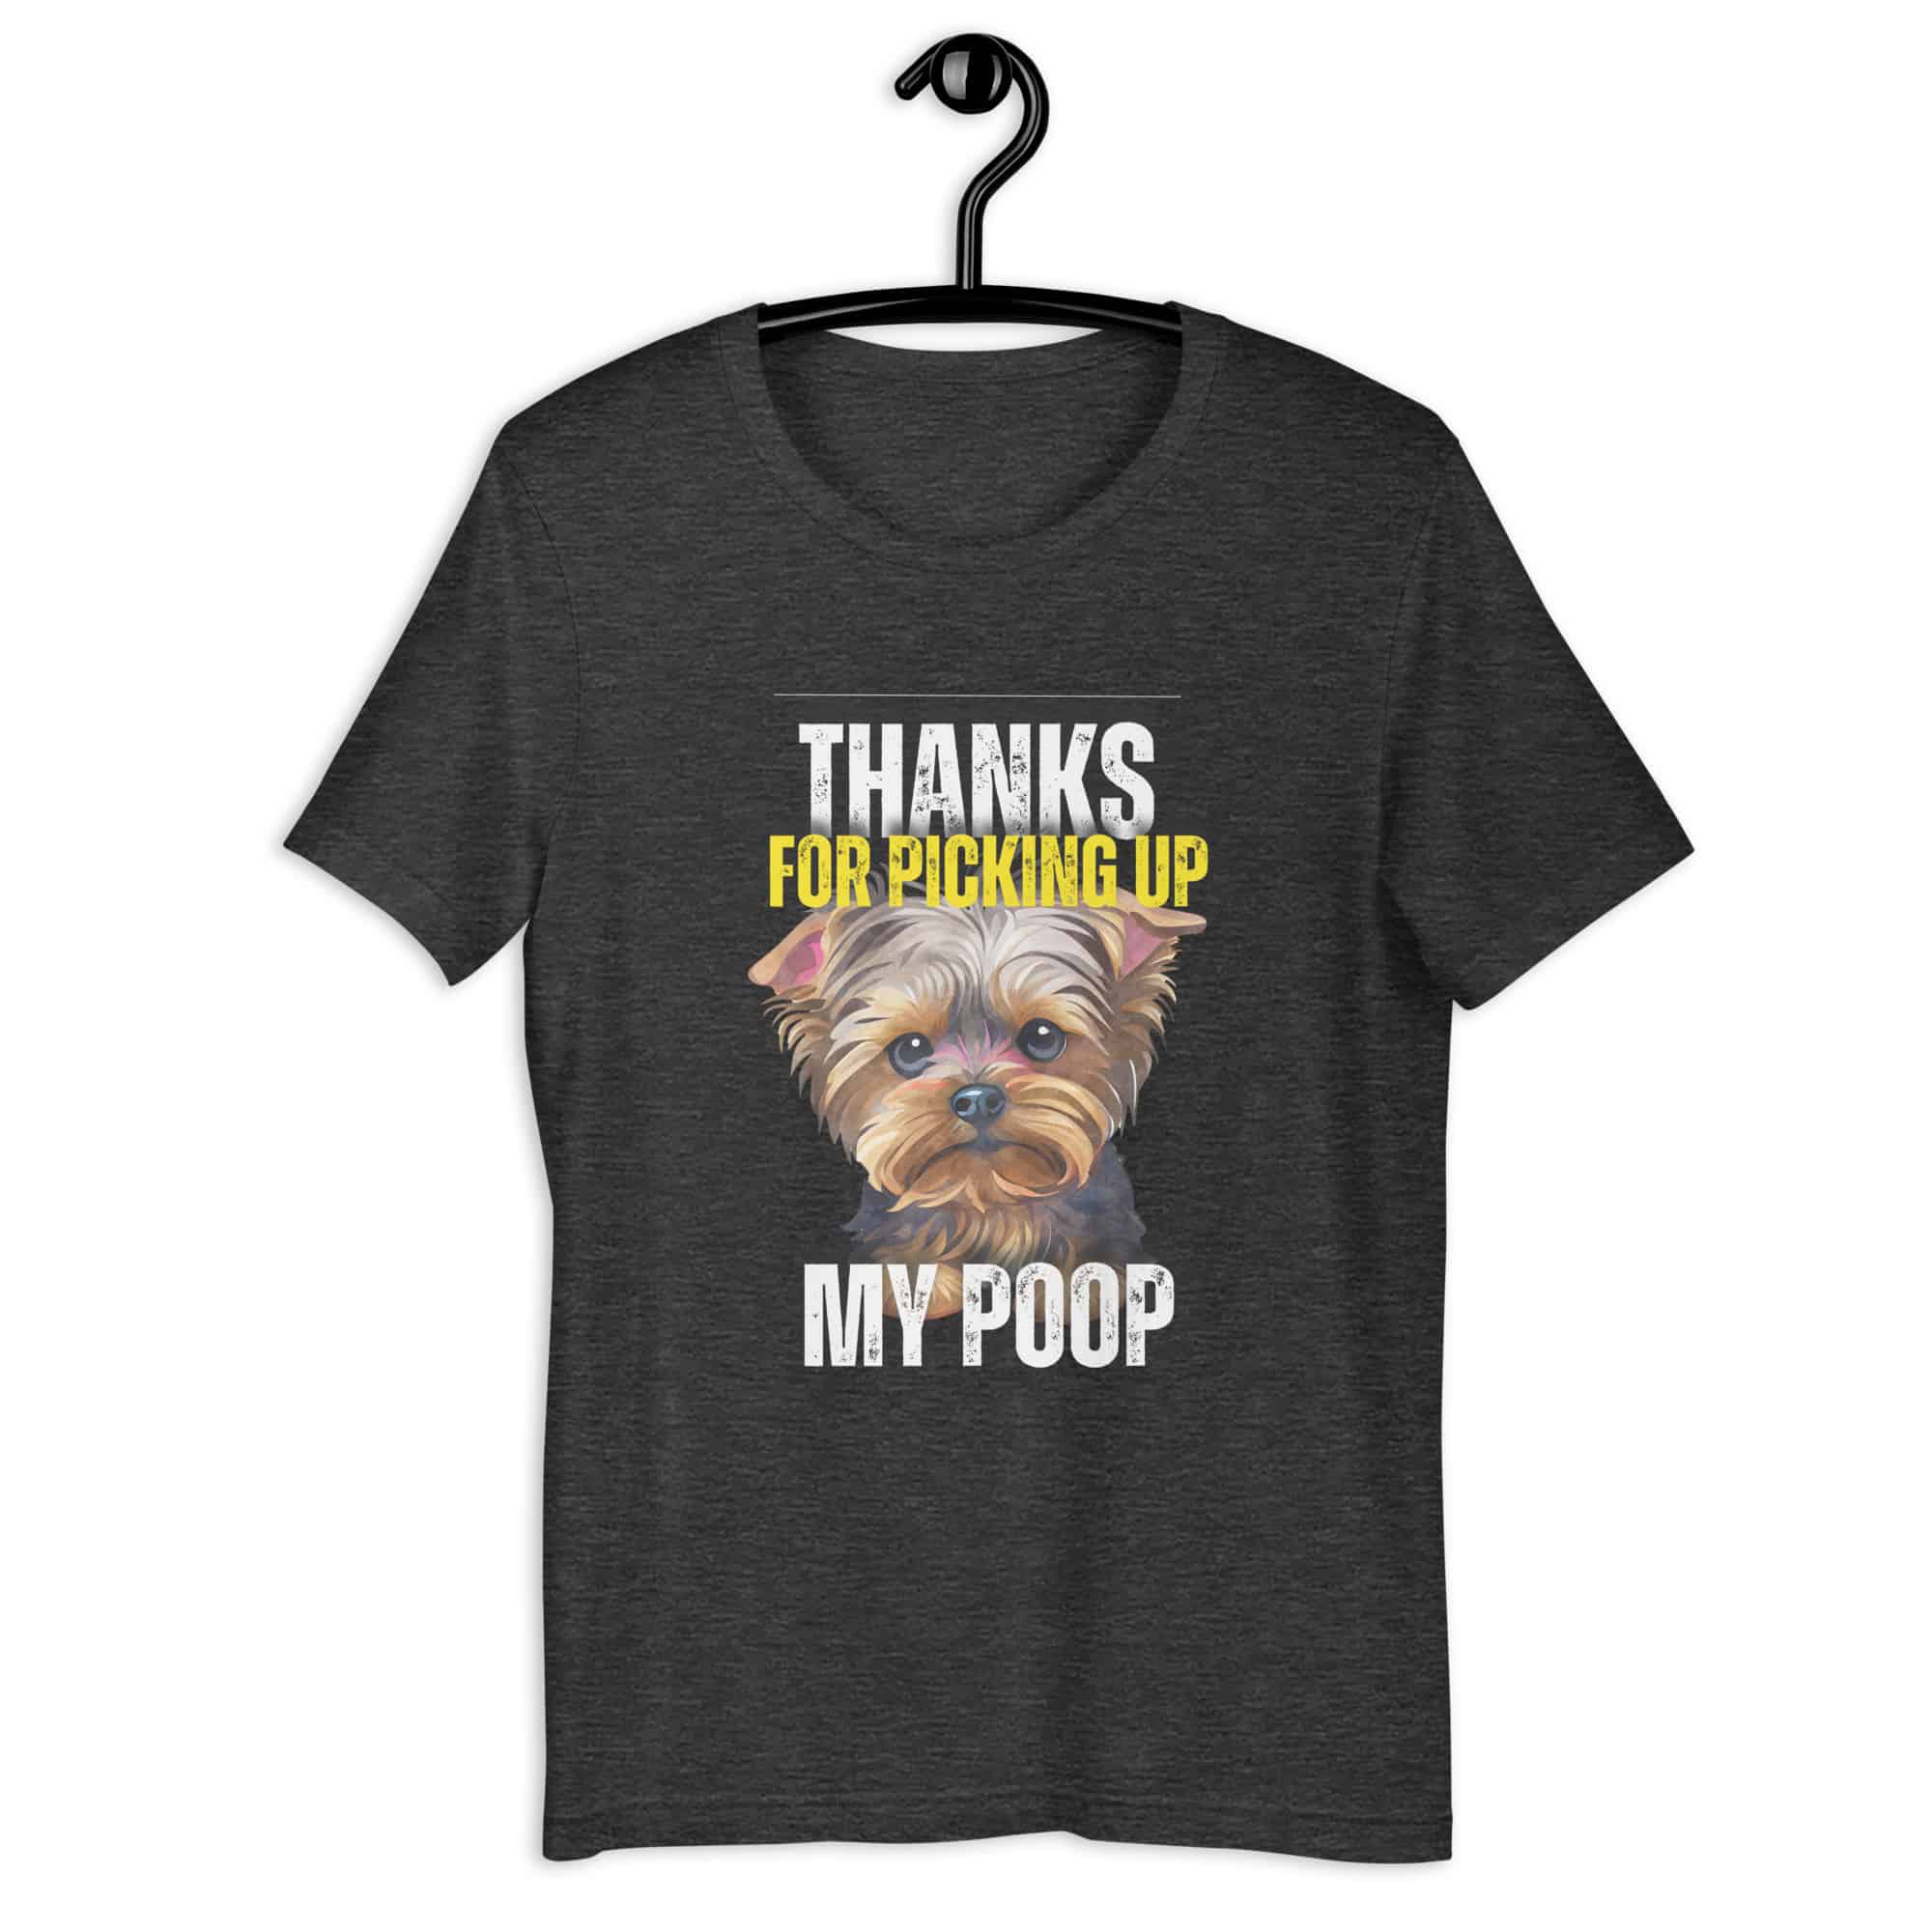 Thanks For Picking Up My POOP Funny Poodles Unisex T-Shirt. Dark Grey